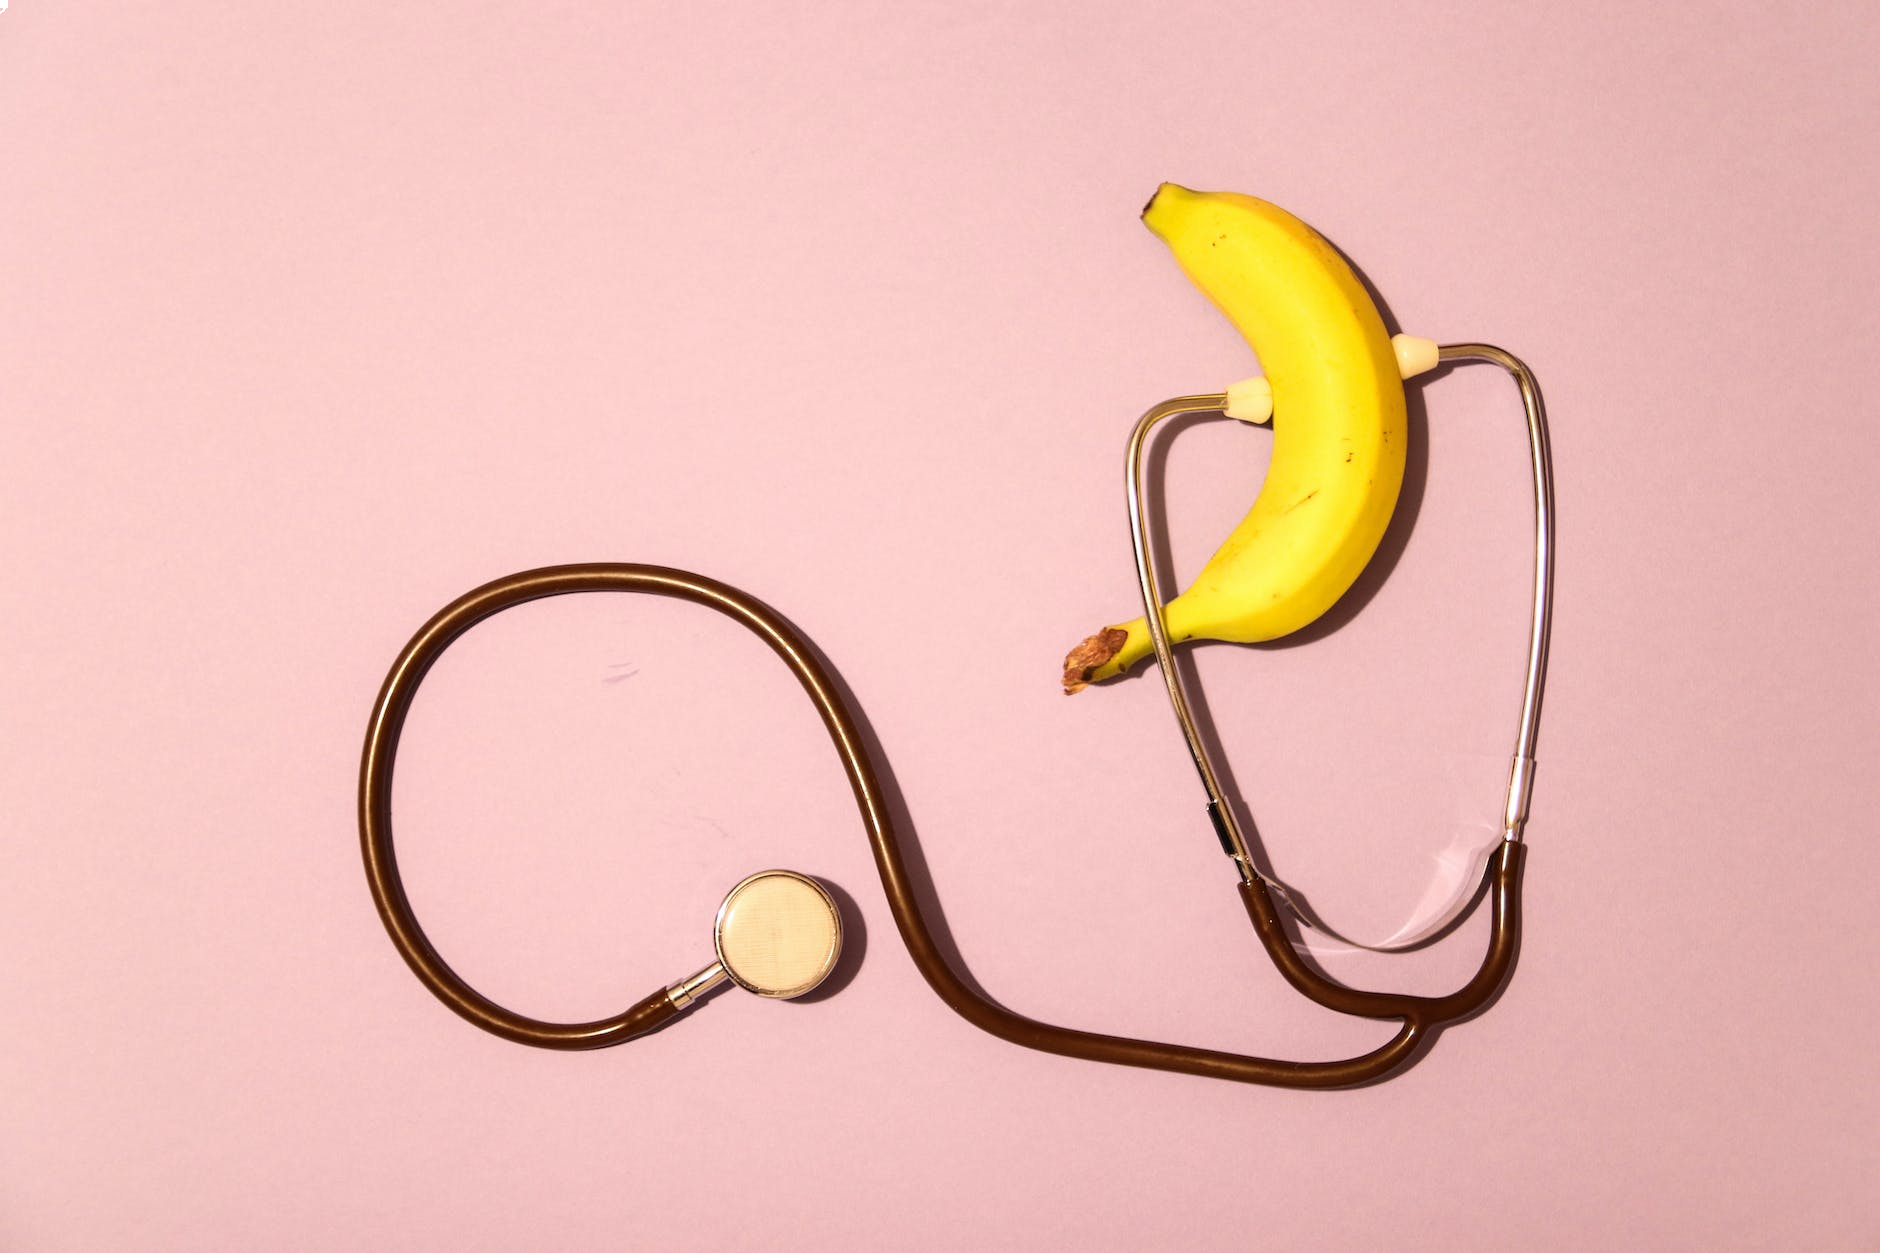 a banana and a stethoscope on a pink surface